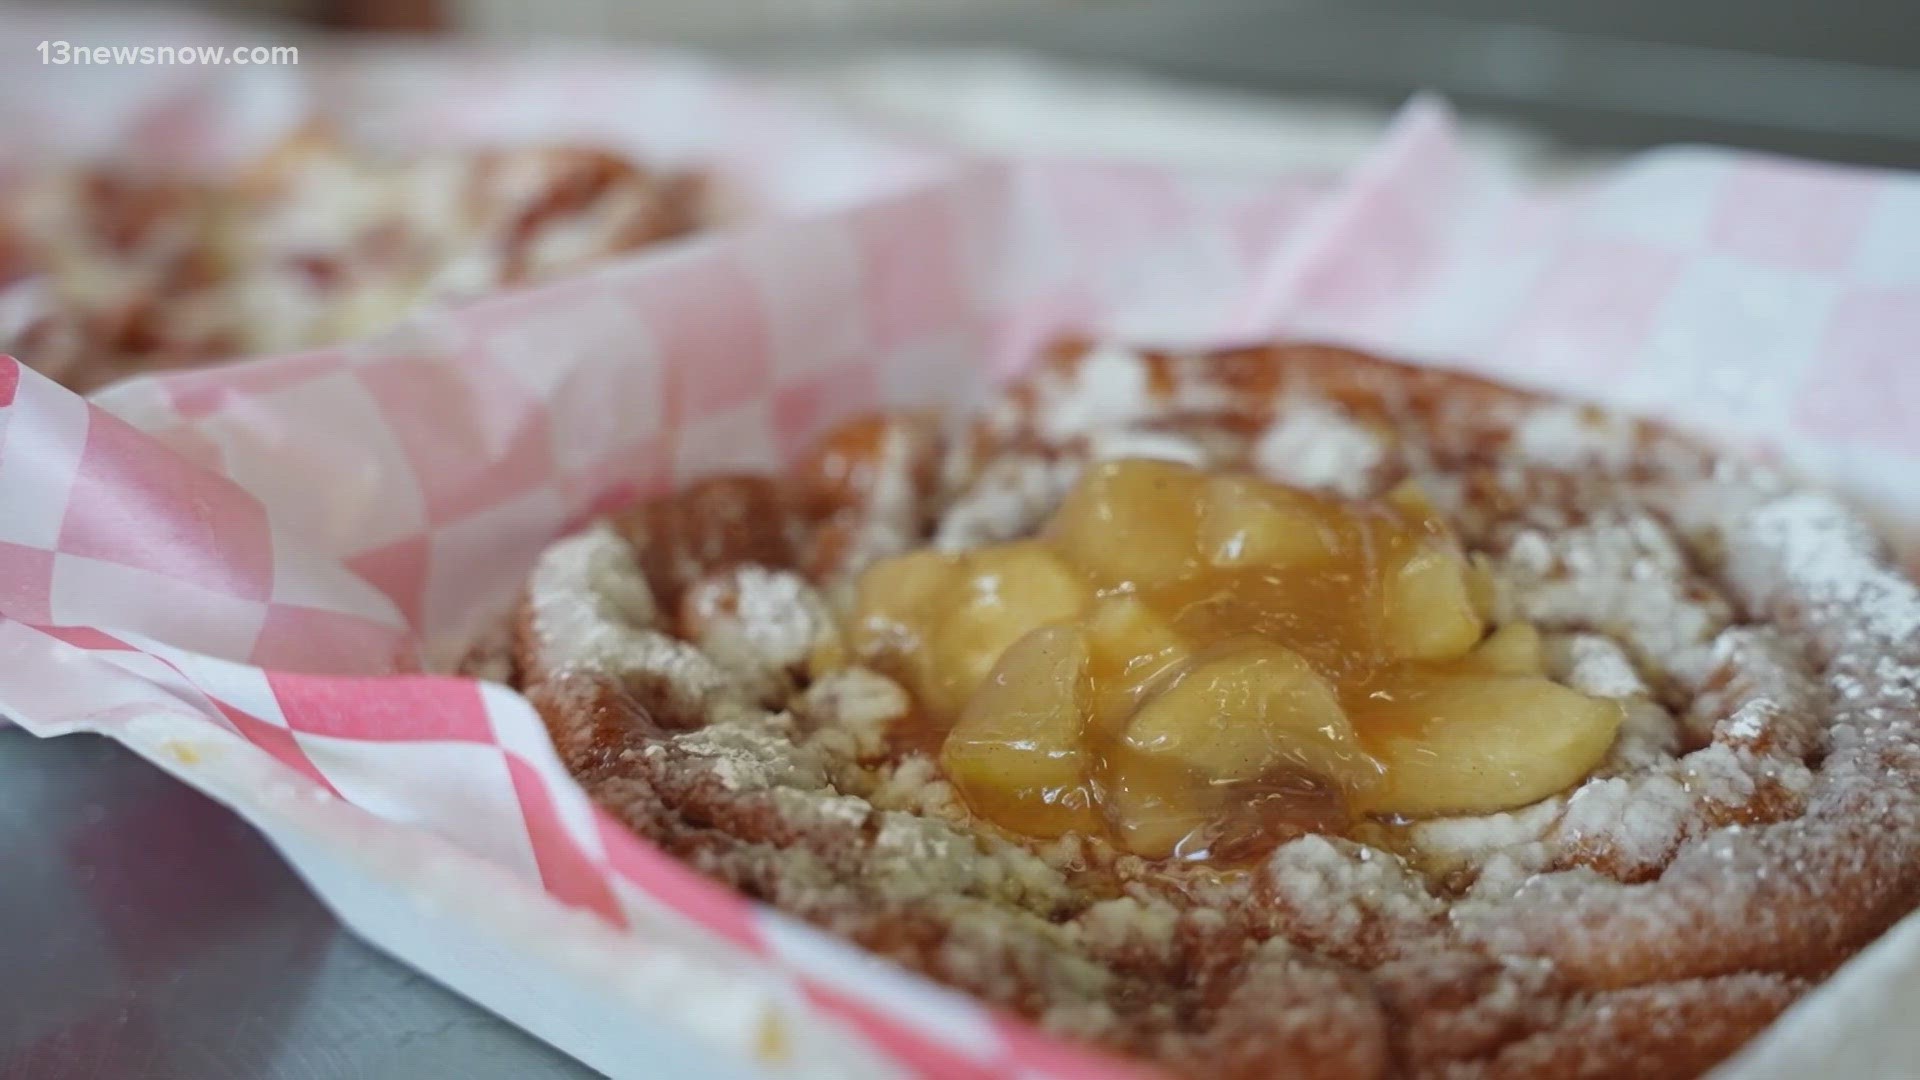 This dessert shop has funnel cakes, cookies, cake, milkshakes, and more!